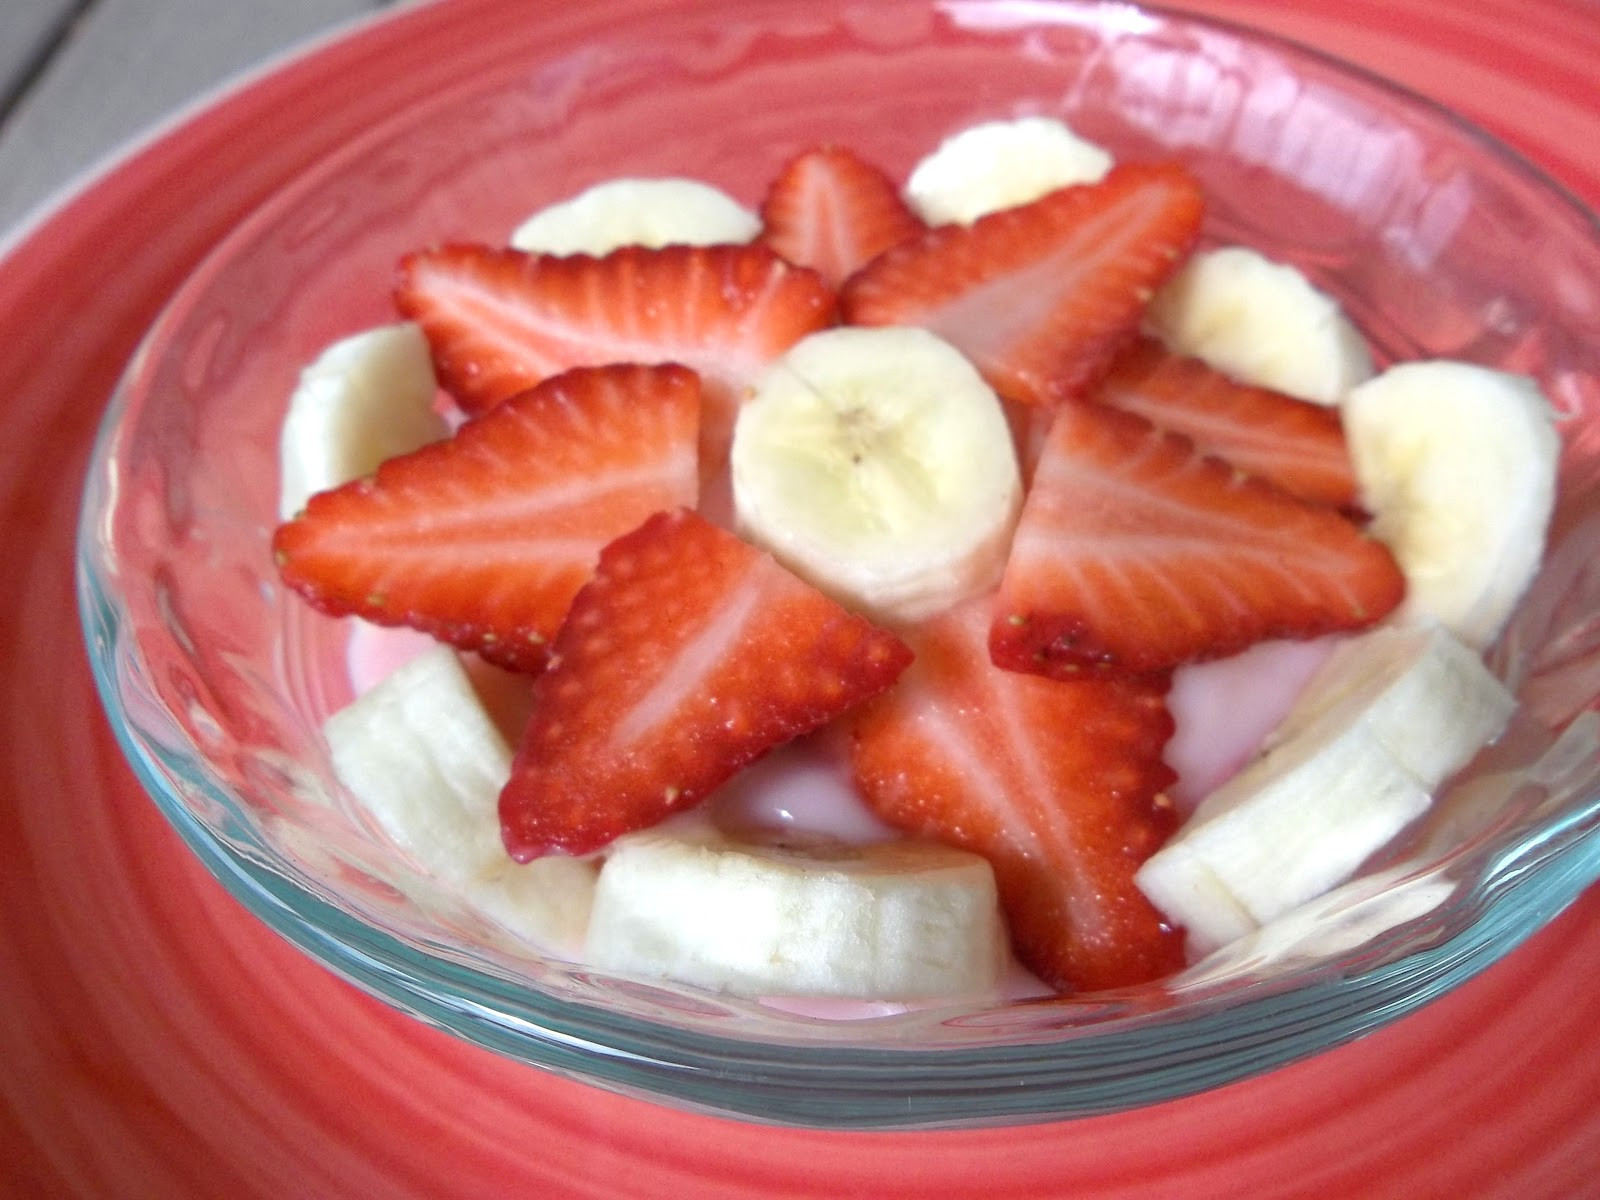 Healthy Fun Snacks For Kids
 10 Healthy Snack Ideas for Kids